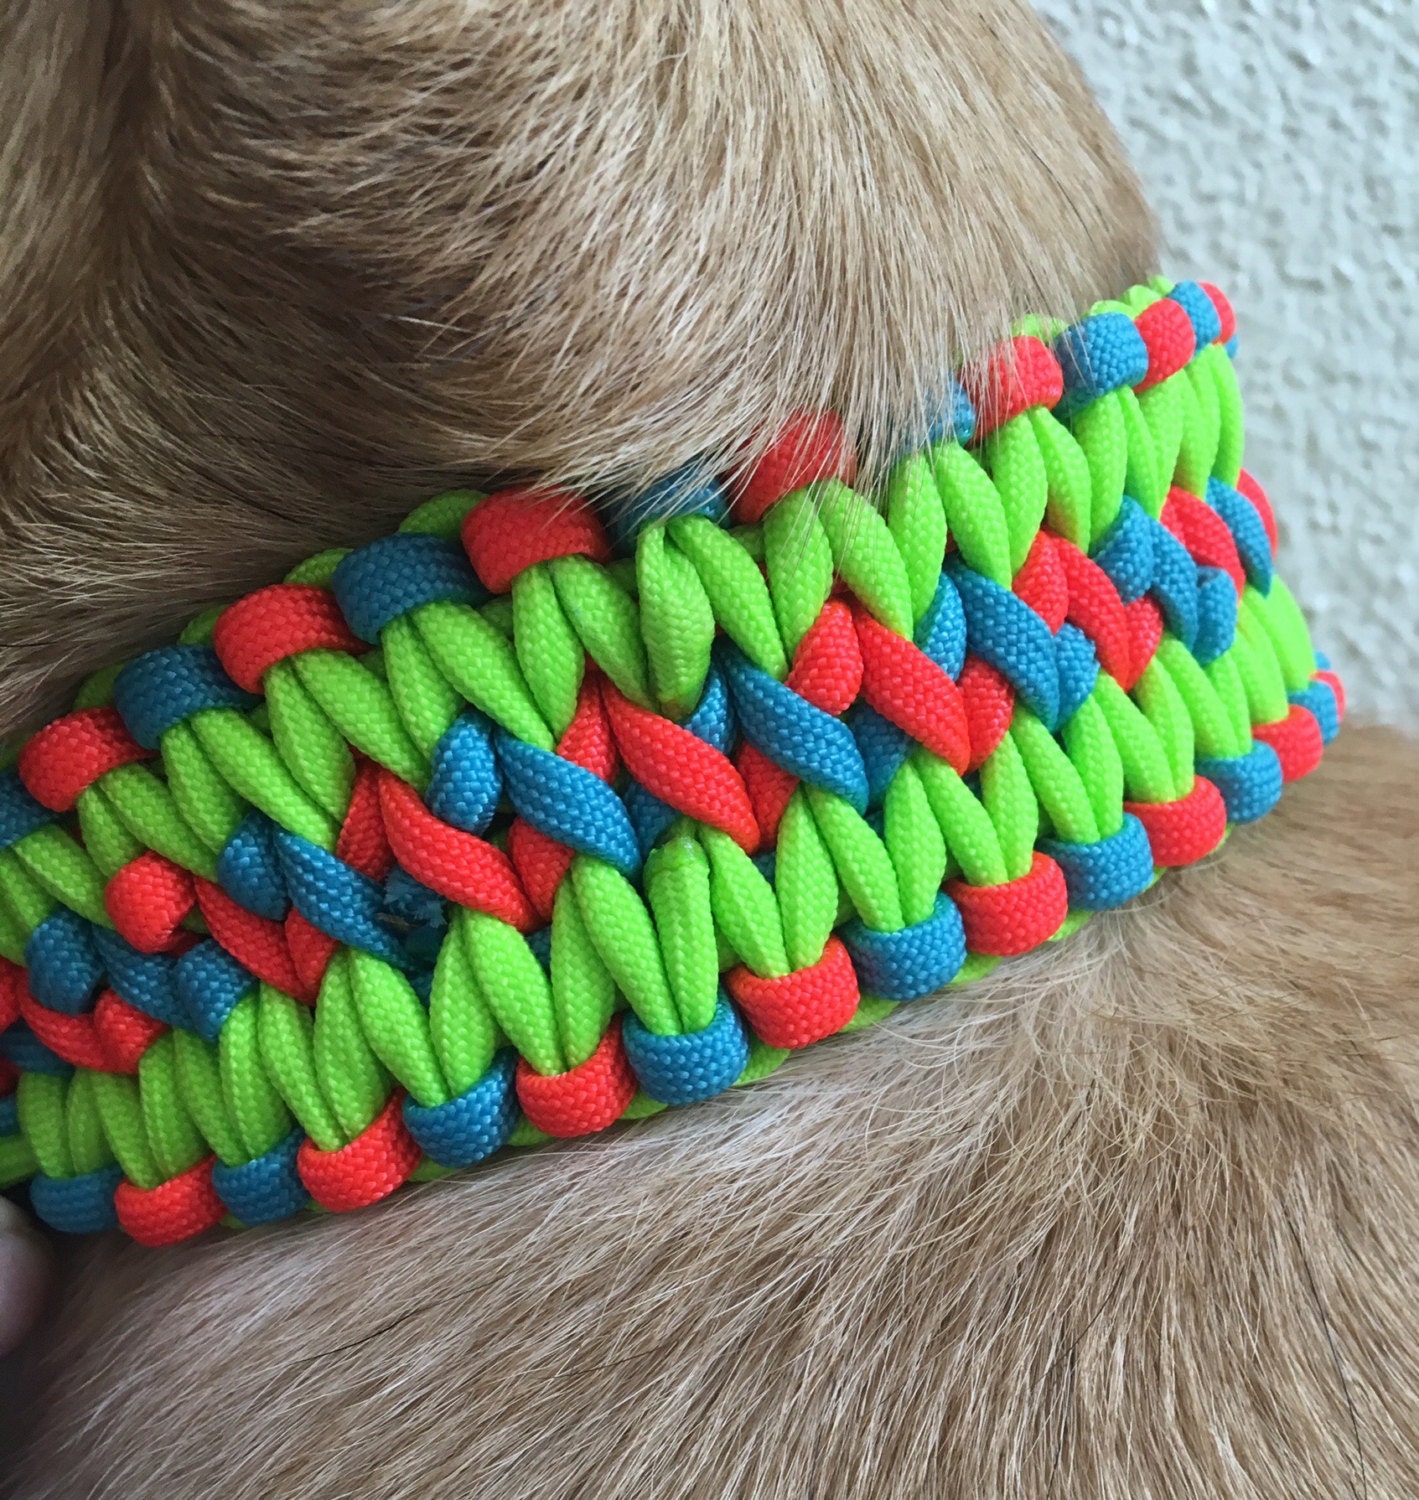 Paracord for Pets - Herringbone Rainbow I think one of my 𝕄𝕠𝕤𝕥  𝕗𝕒𝕧𝕠𝕣𝕚𝕥𝕖 color combinations of all time! ➡️ Goes best with a  #MERLE, a, #BLACK or any other color #dog you